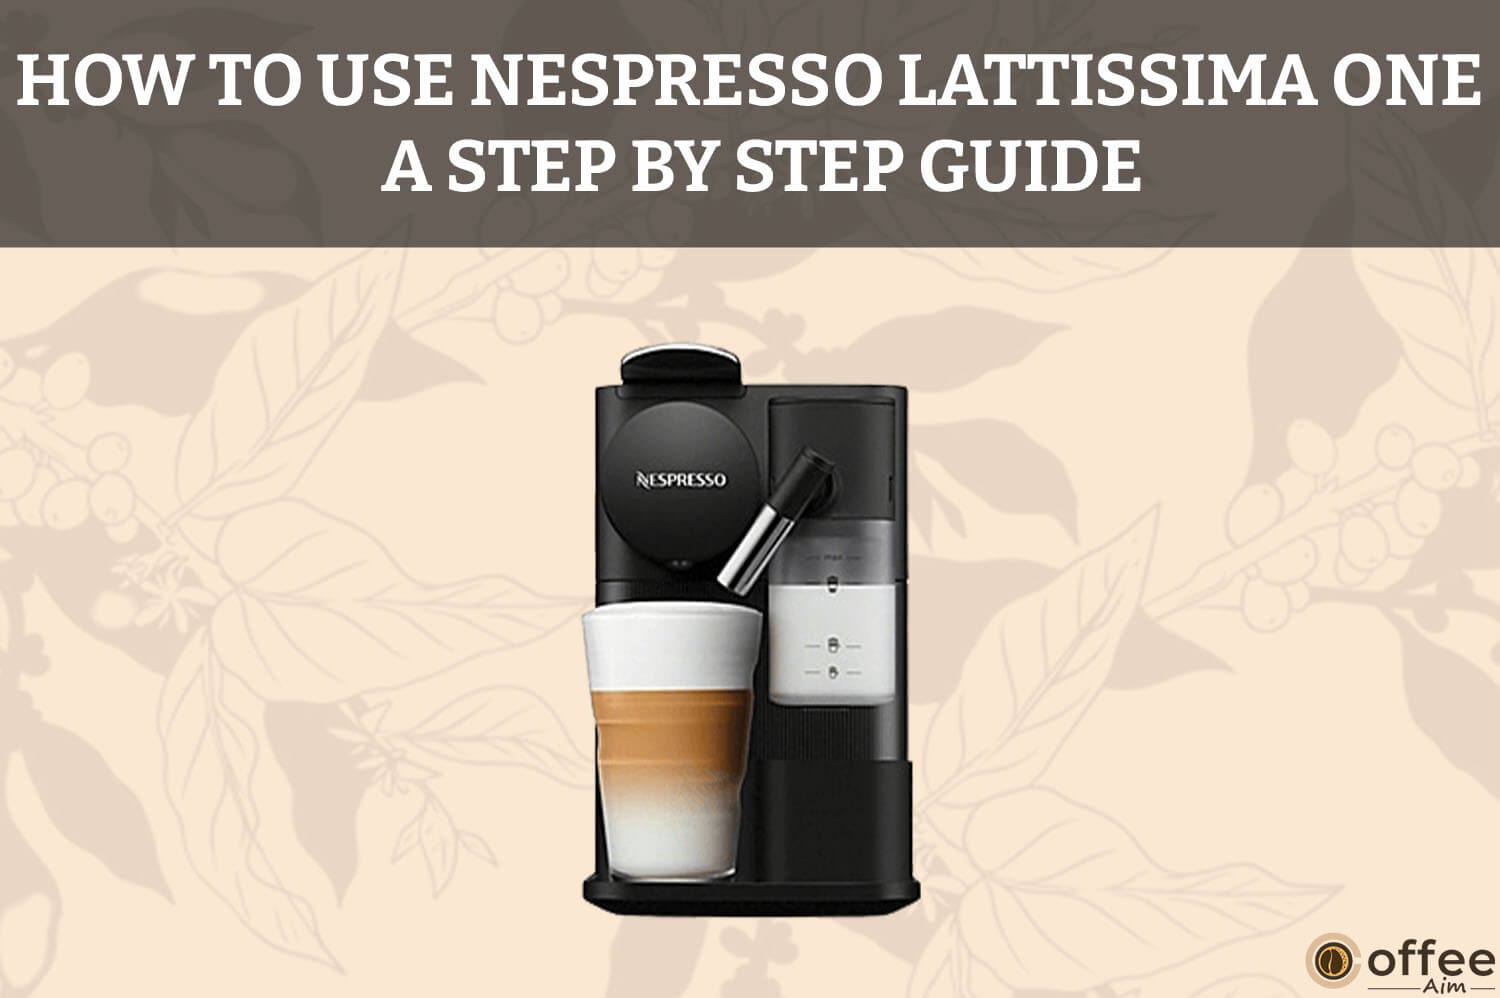 Featured image for the article "How to Use Nespresso Lattissima One"